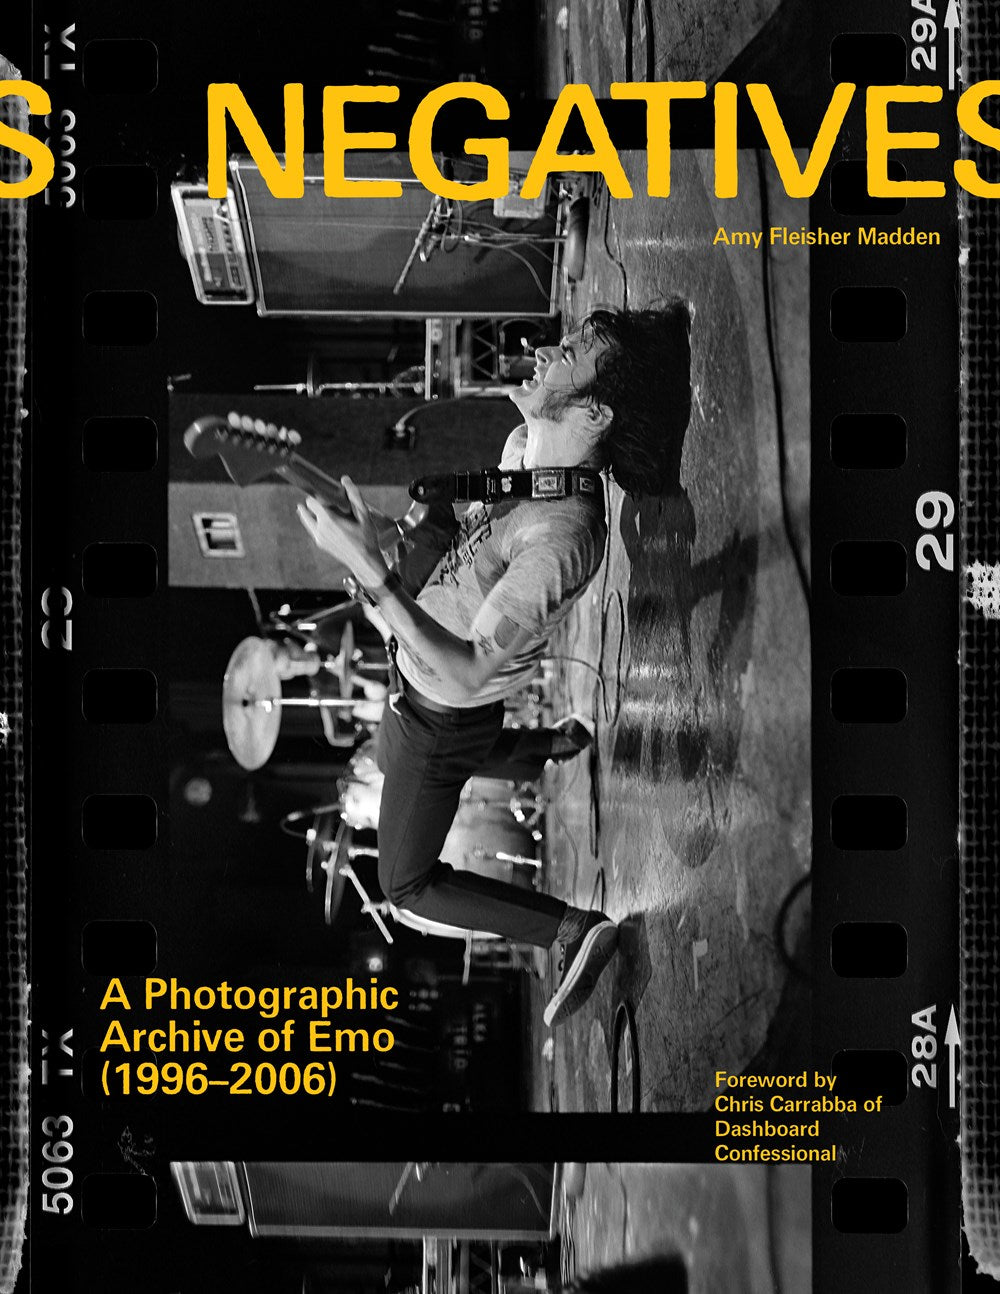 Negatives: A Photographic History of Emo (1996-2006) by Amy Fleisher Madden (10/24/23)